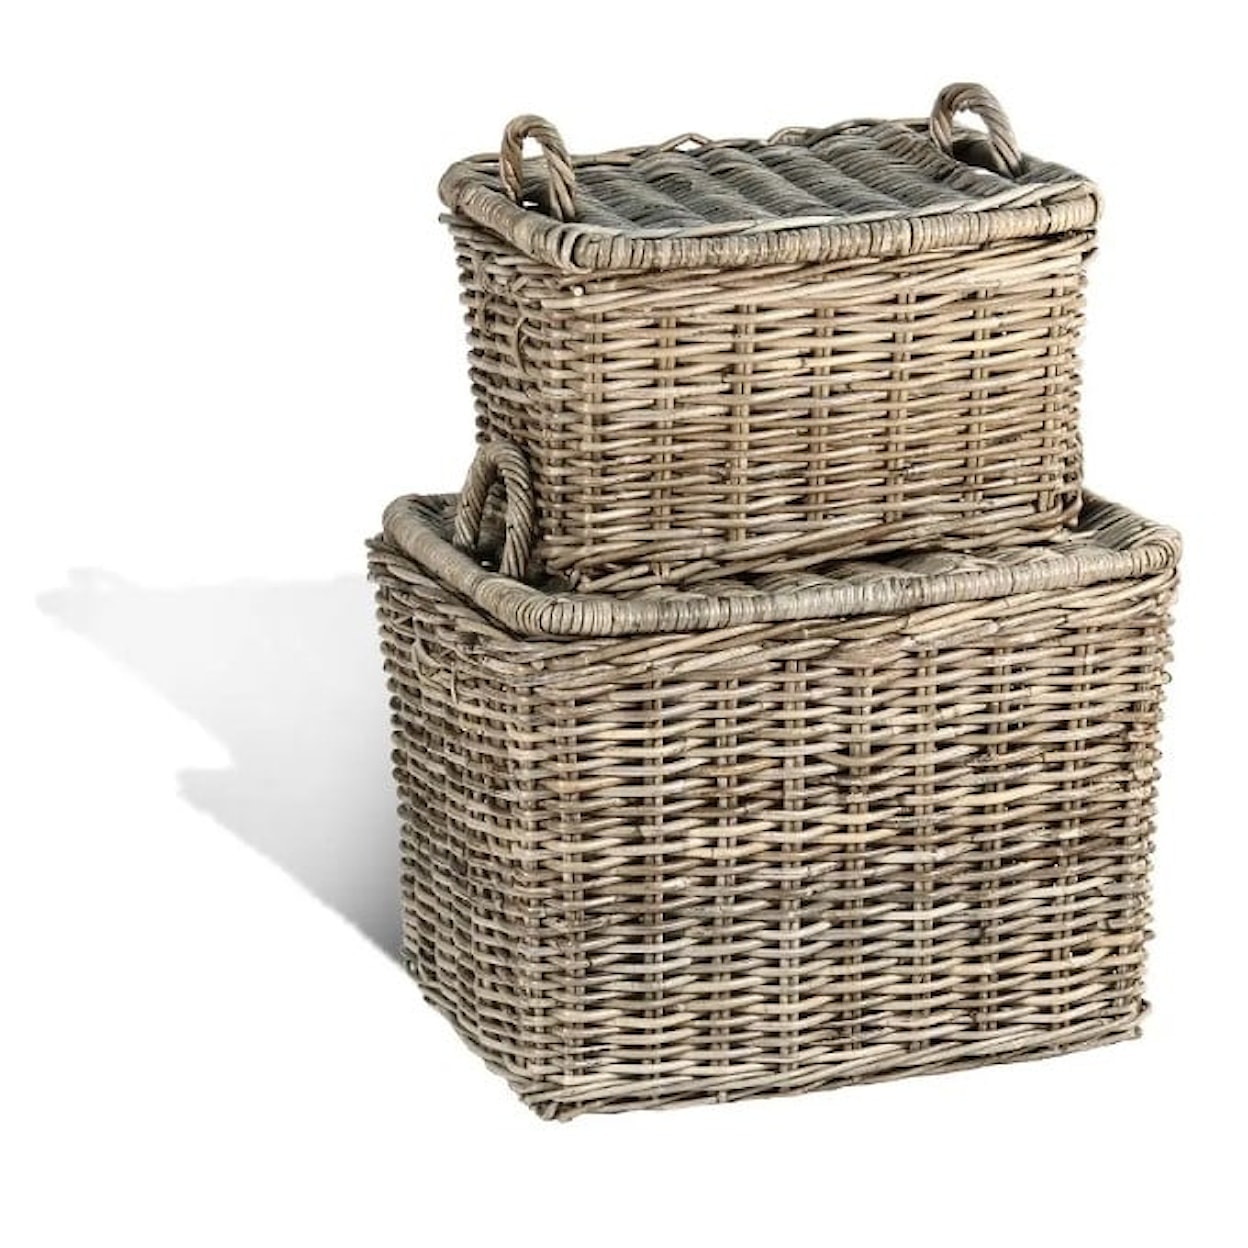 Ibolili Baskets and Sets FRENCH GRAY PICNIC BASKET, RECT- S/2